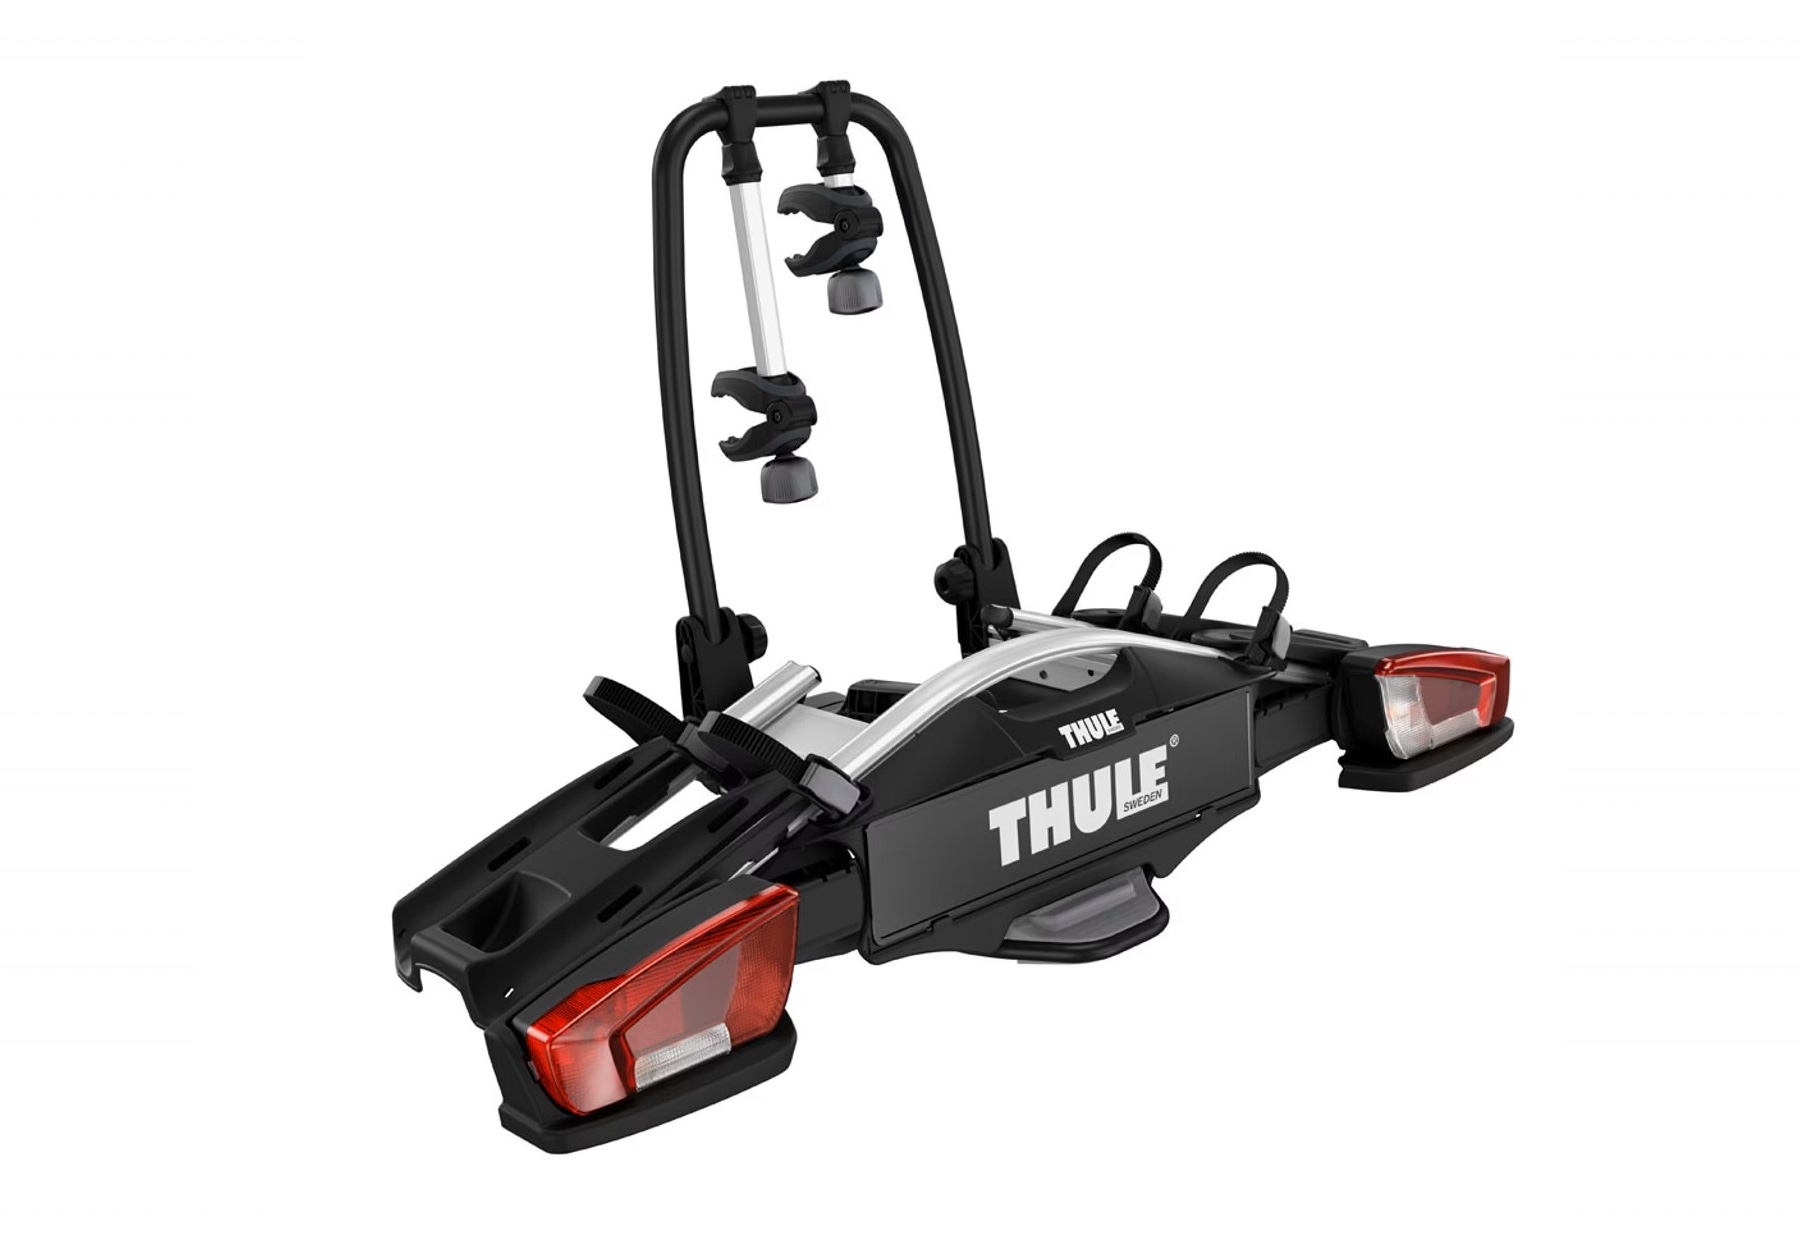 Thule VeloCompact 924 for carrying 2 bikes